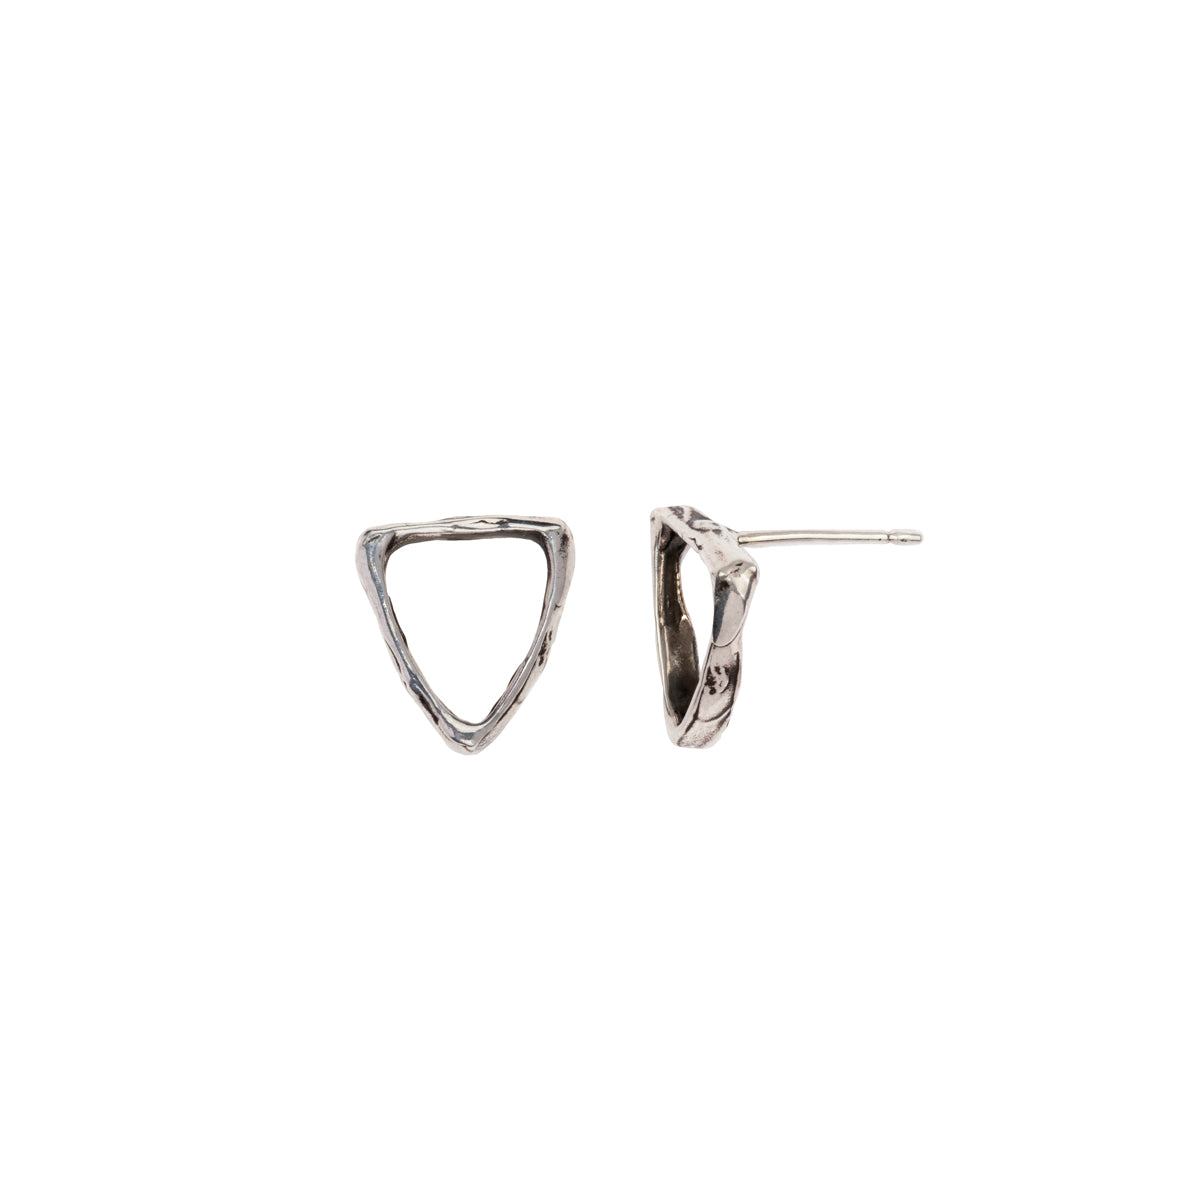 A set of sterling silver extra small open shield studs.